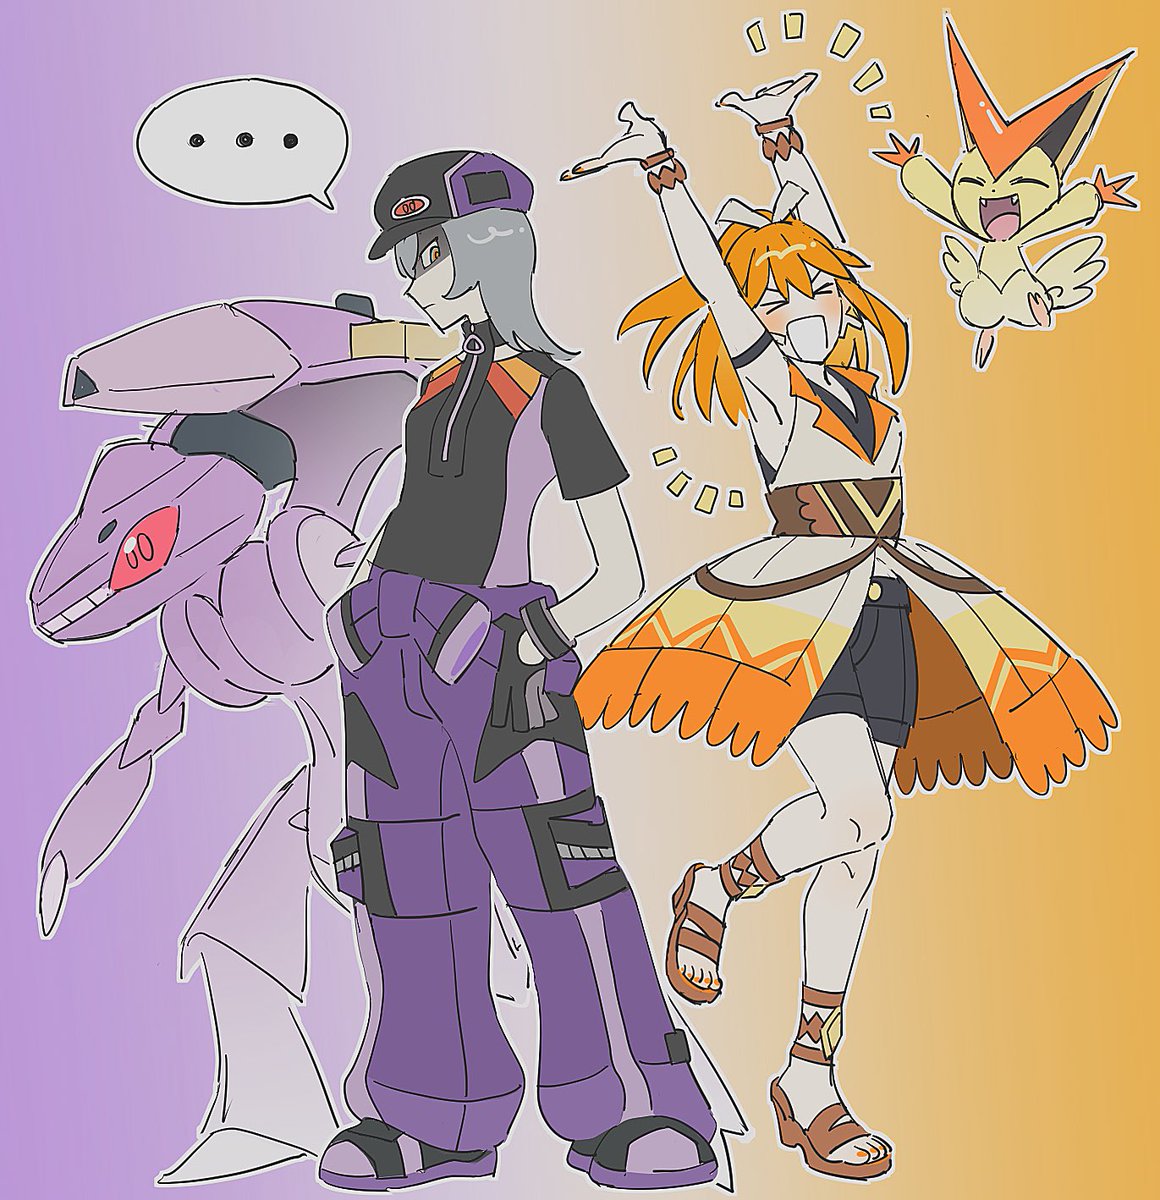 sacha/winry in the genesect/victini signa suits 💜🧡